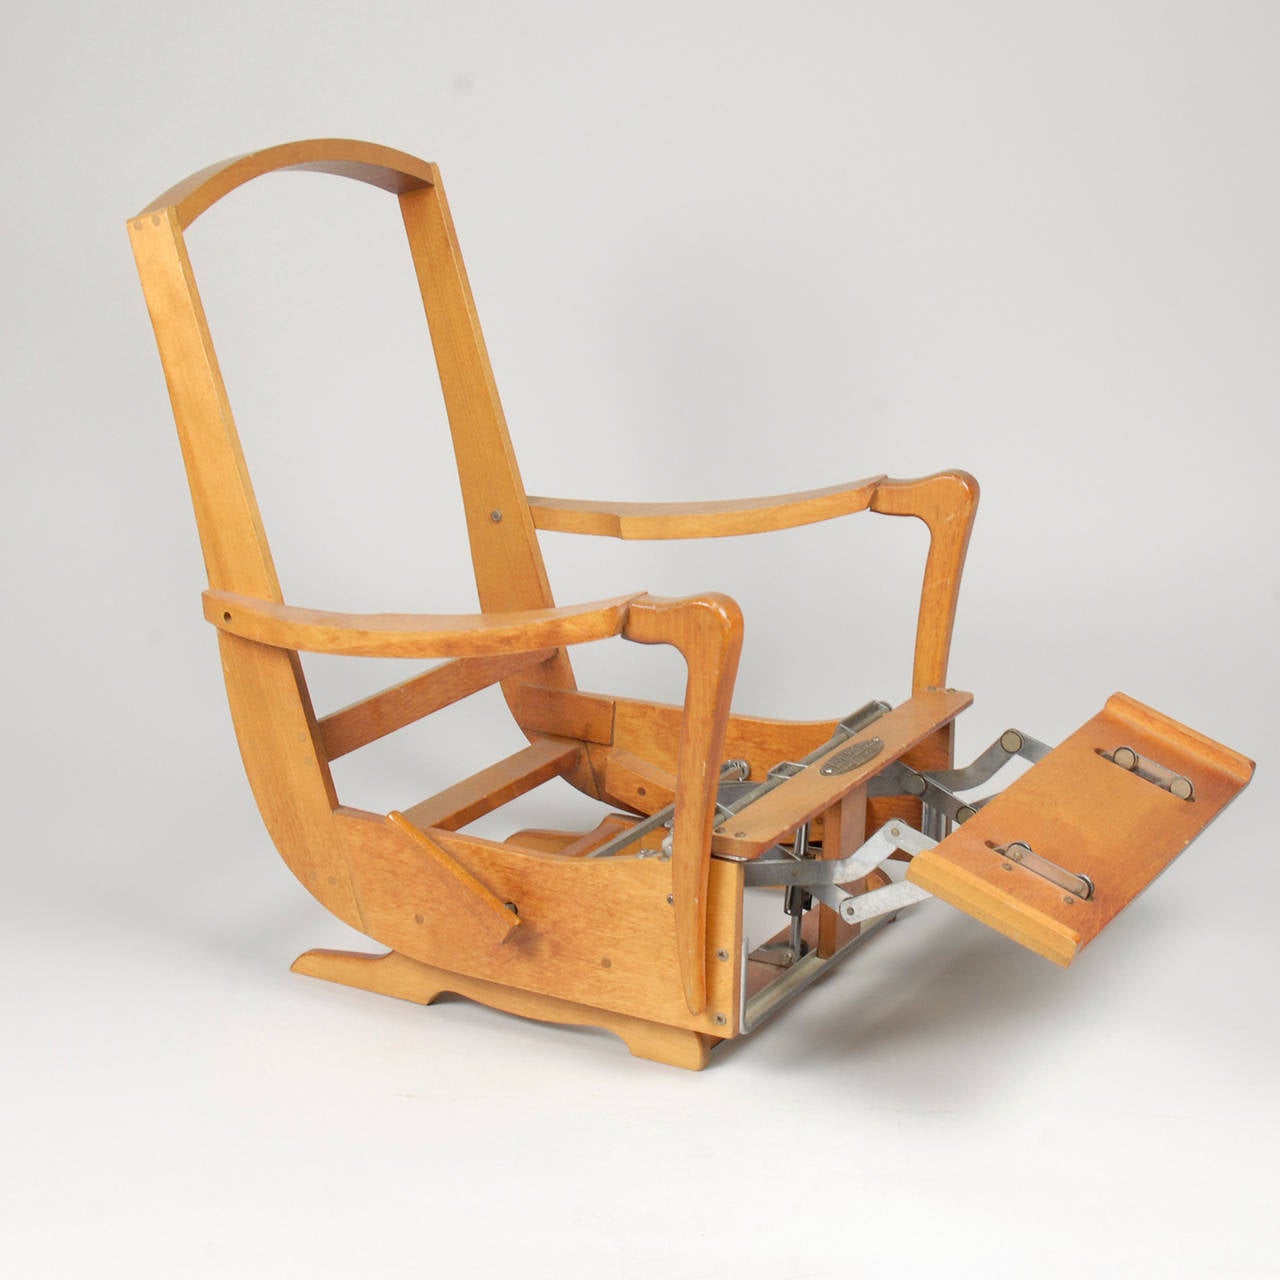 Completely functional, terrific Salesman’s sample of the La-Z-Rocker, patented by the La-Z-Boy Chair Co., Monroe, Michigan.
Dimensions: 13 x 9.5 x 9 inches.